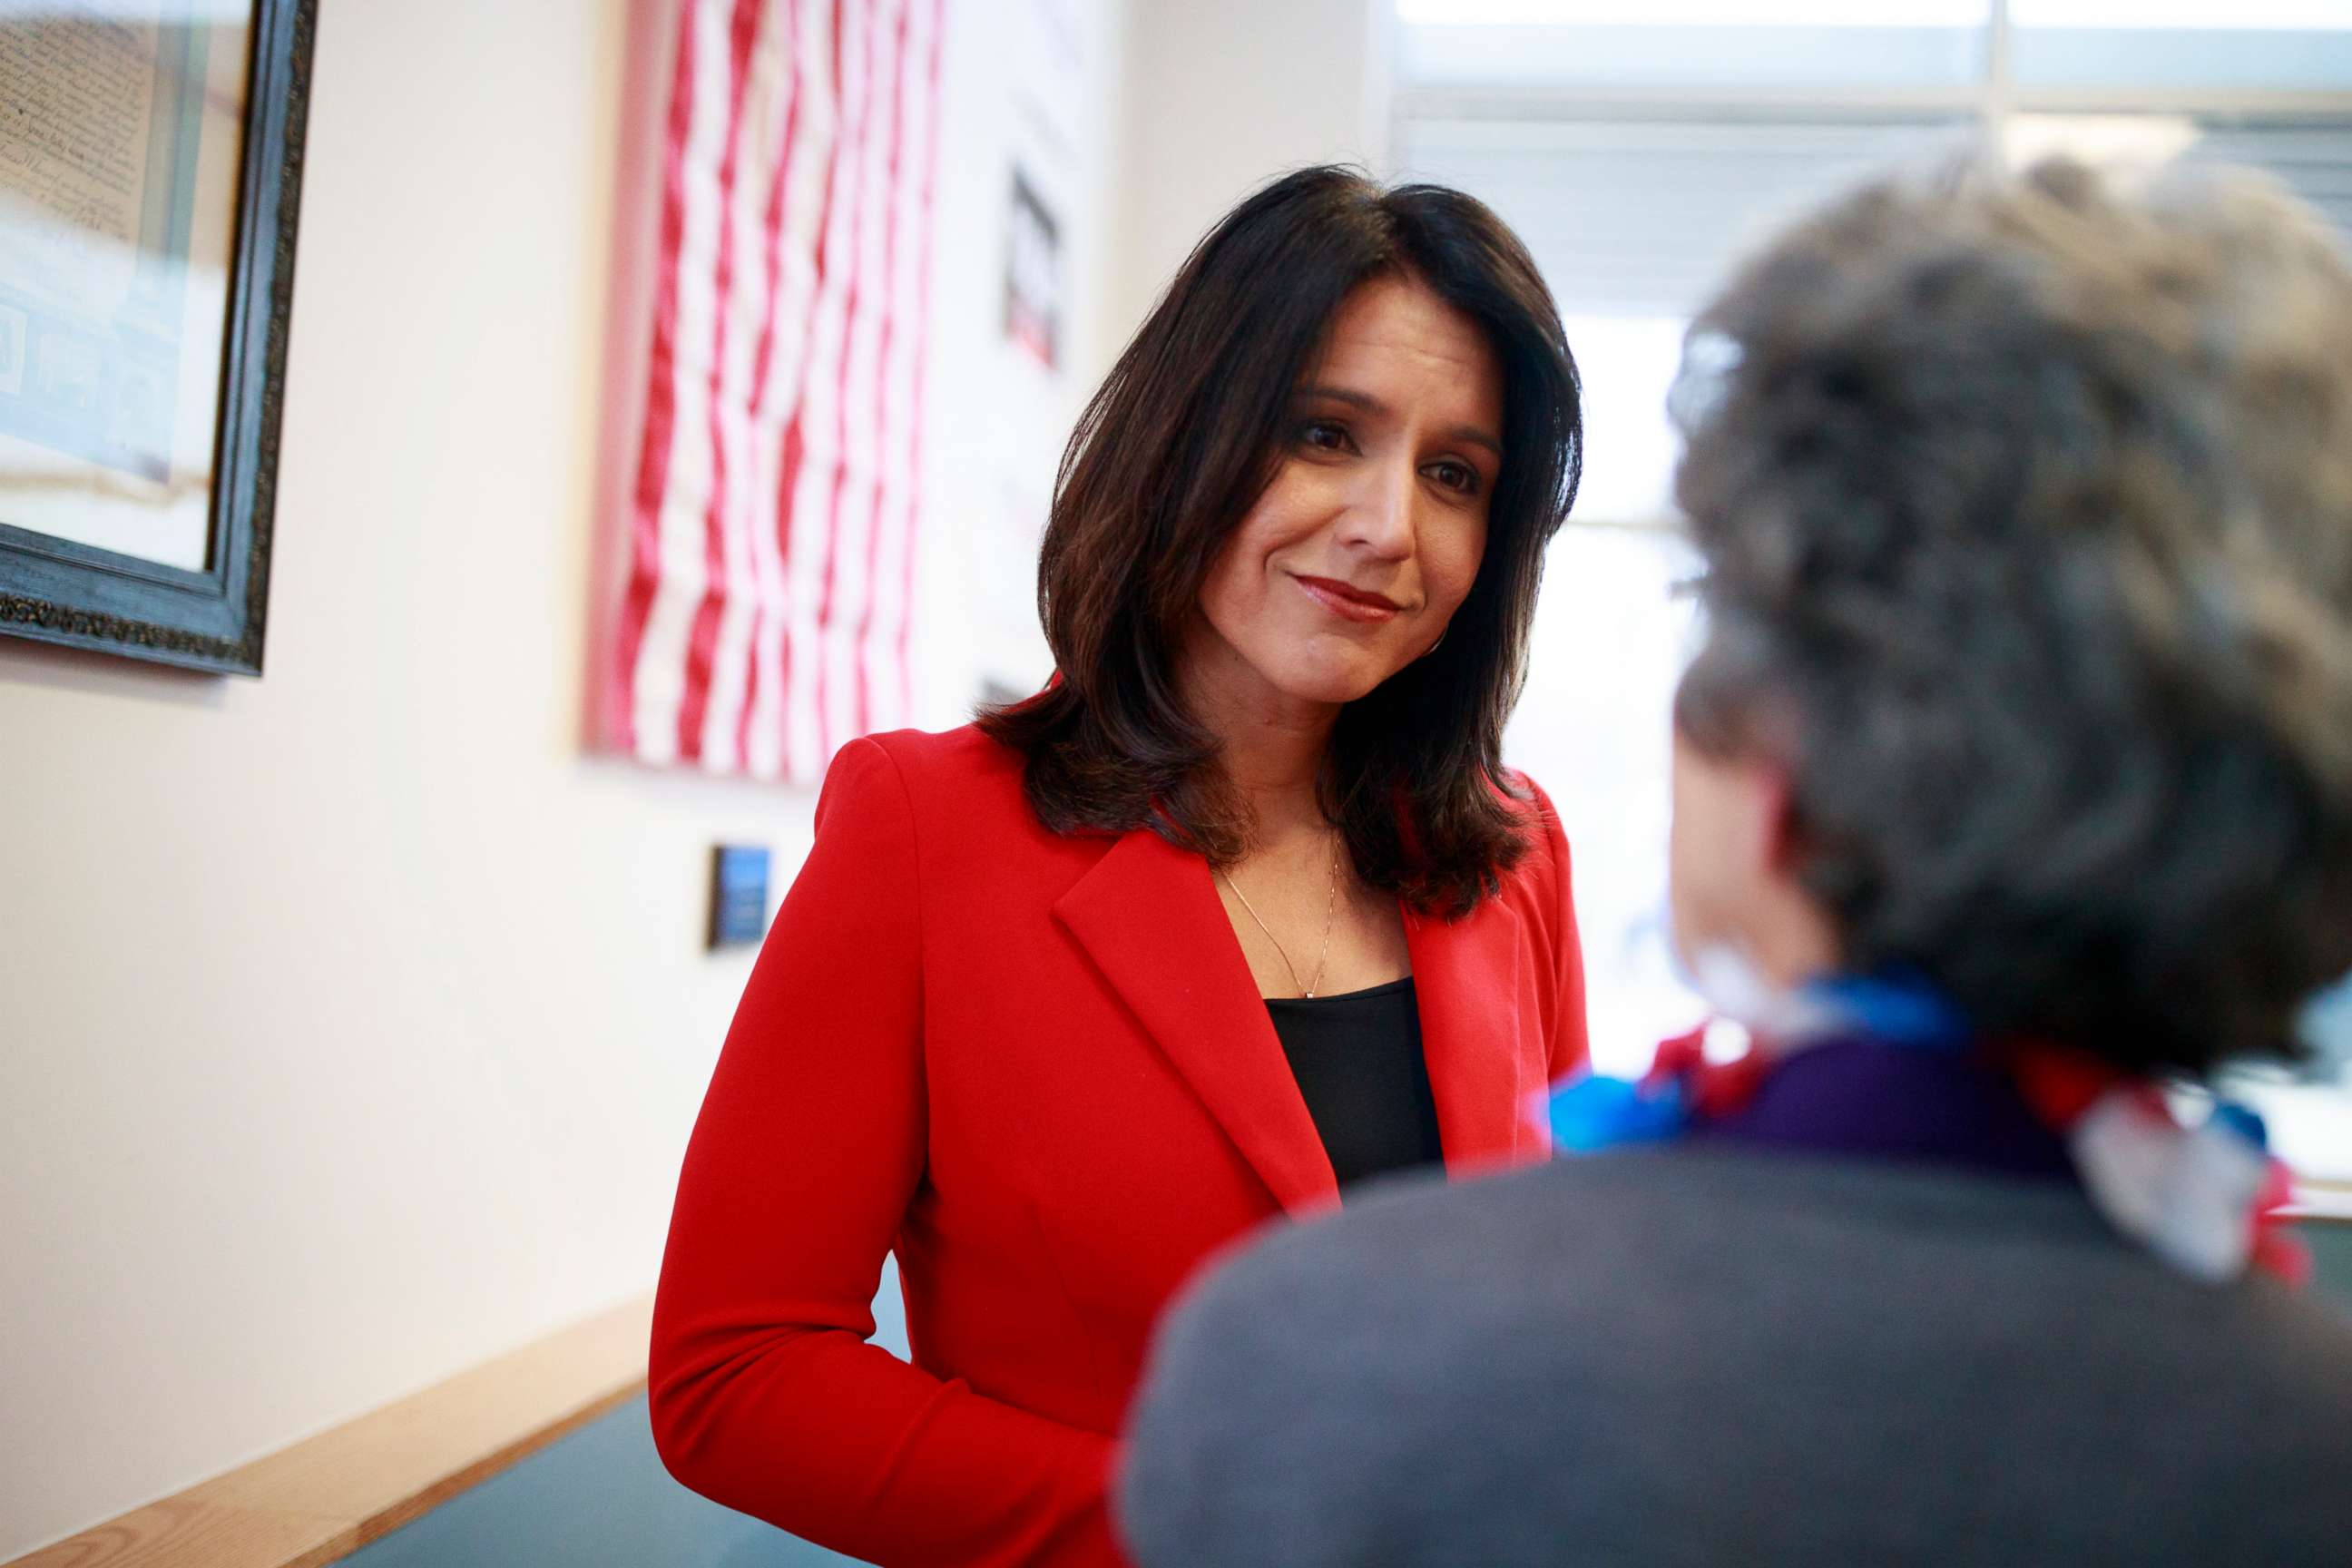 PHOTO: Democratic presidential candidate Tulsi Gabbard speaks to veterans during a campaign rally, April 16, 2019, in Iowa City, Iowa.